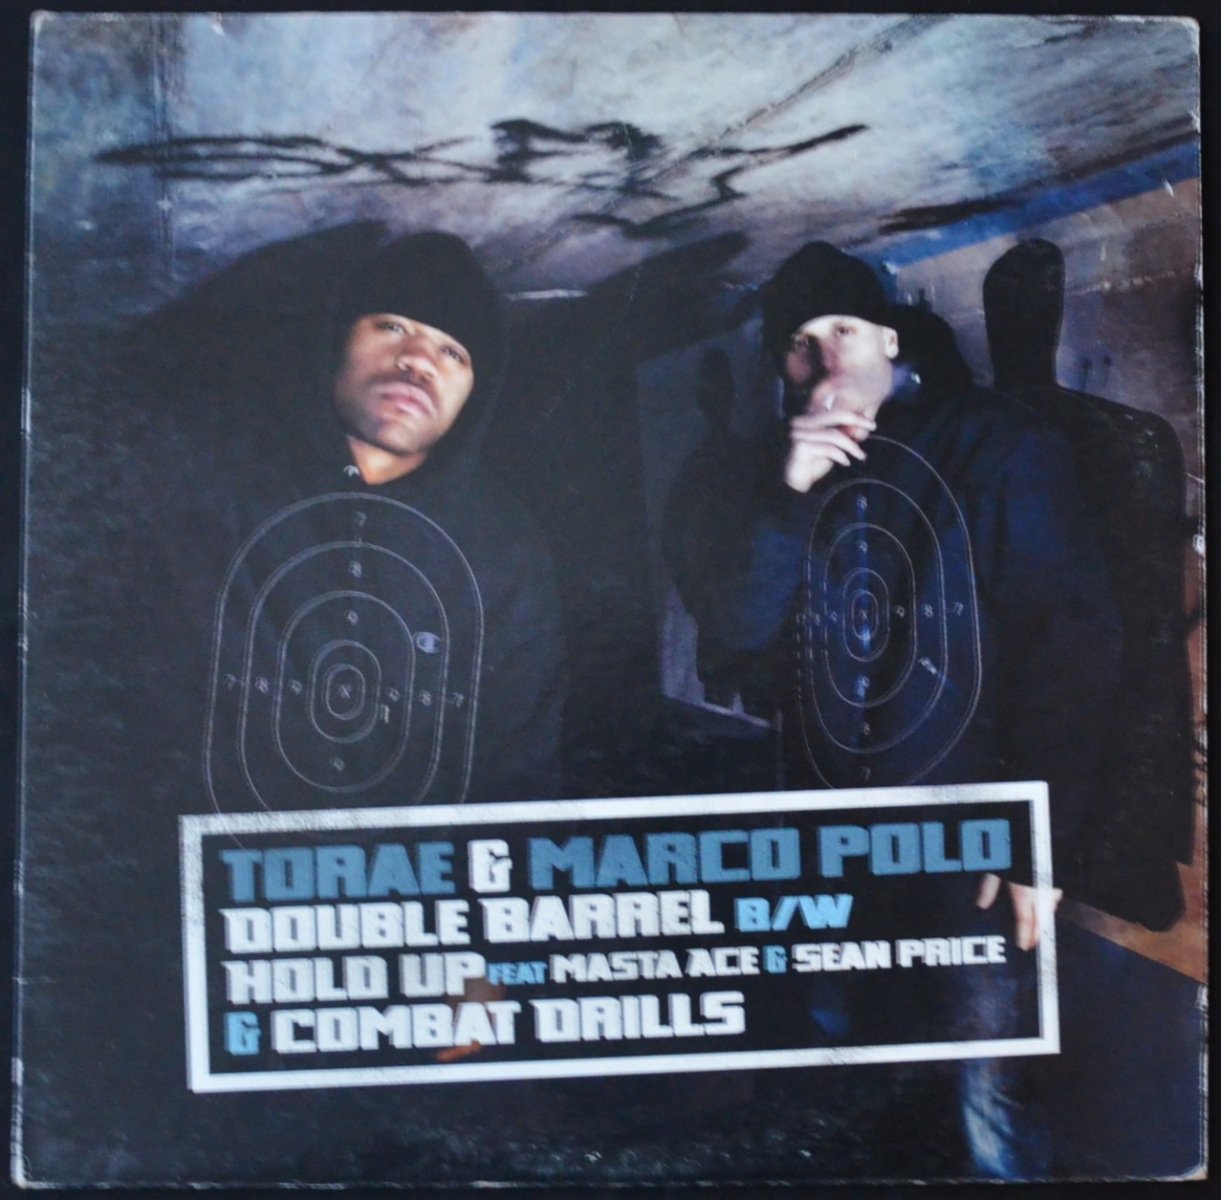 TORAE & MARCO POLO / DOUBLE BARREL / HOLD UP / COMBAT DRILLS (12